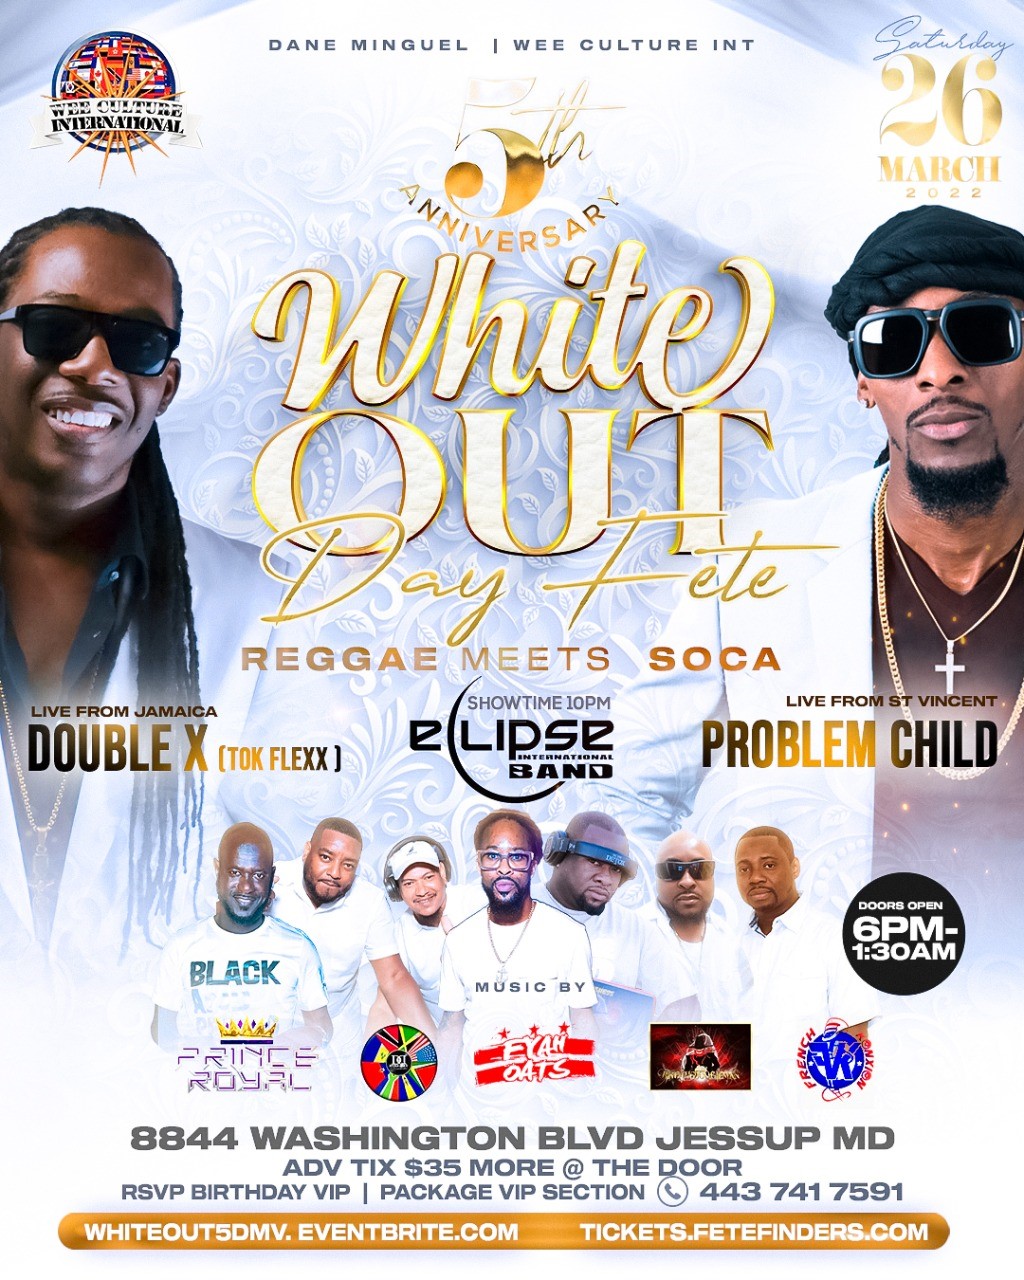 WHITE OUT 5 REGGAE MEETS SOCA on Mar 26, 21:00@8844 Washington Blvd Jessup, MD - Buy tickets and Get information on www.fetefinders.com tickets.fetefinders.com